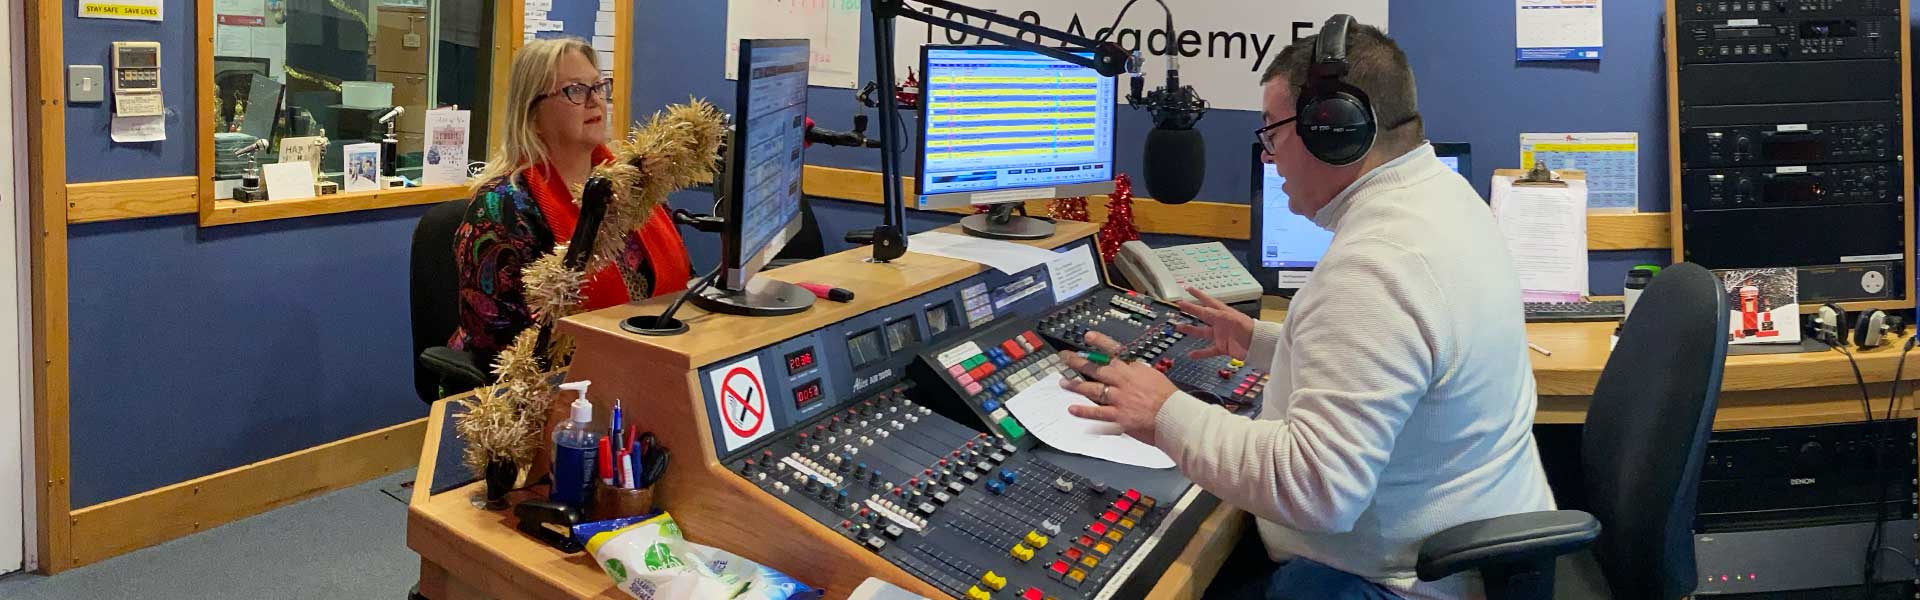 Image of Karen Constantine and Paul Rutterford in the Academy FM studio